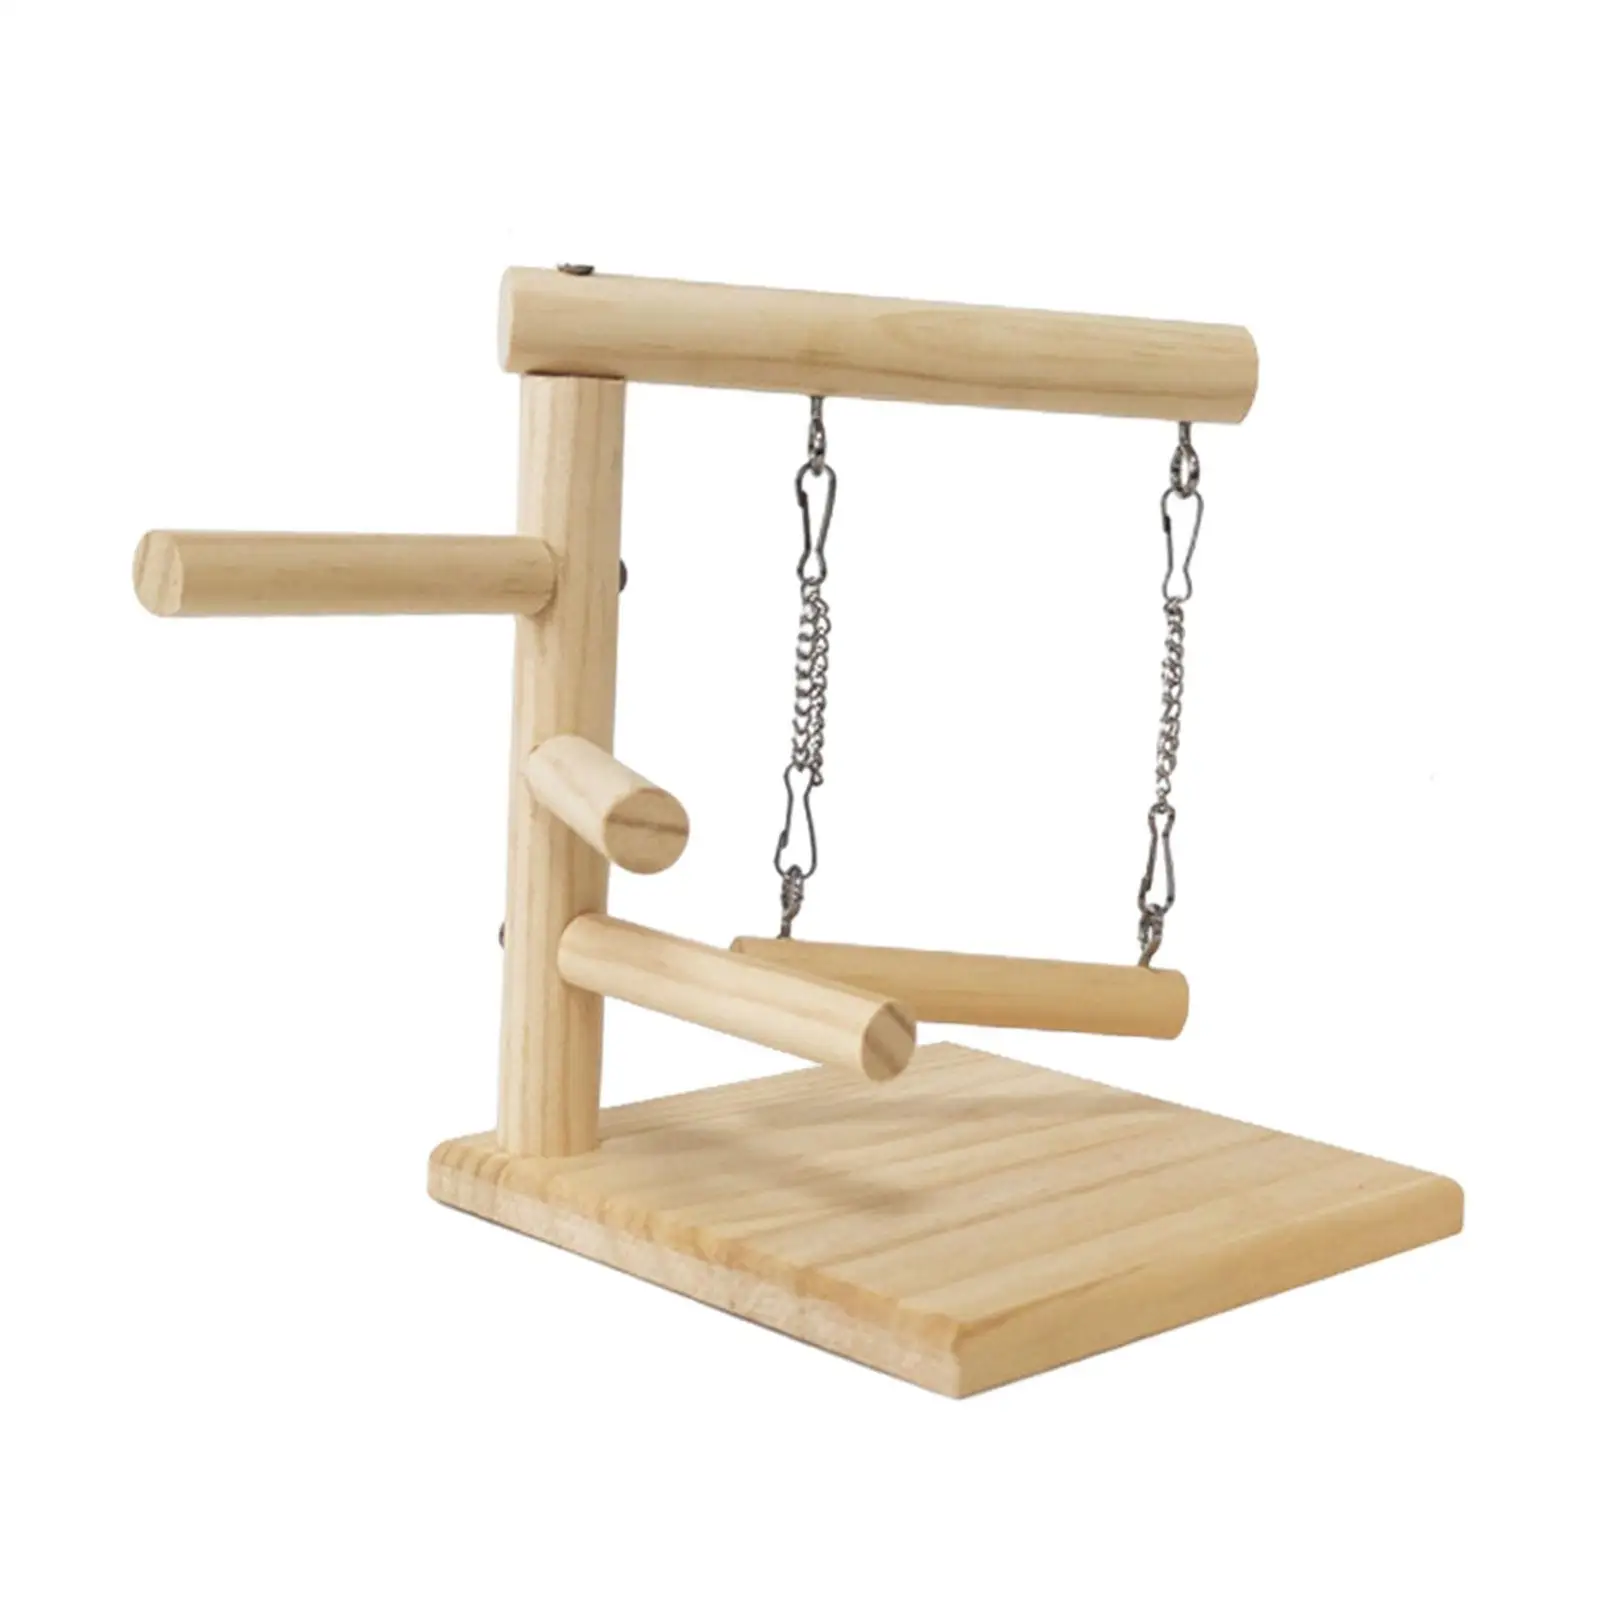 Wooden Perch Playstand Platform Bird Tabletop Training Perch Play Stand for Lovebirds Canaries Cockatiels Parrots Parakeets